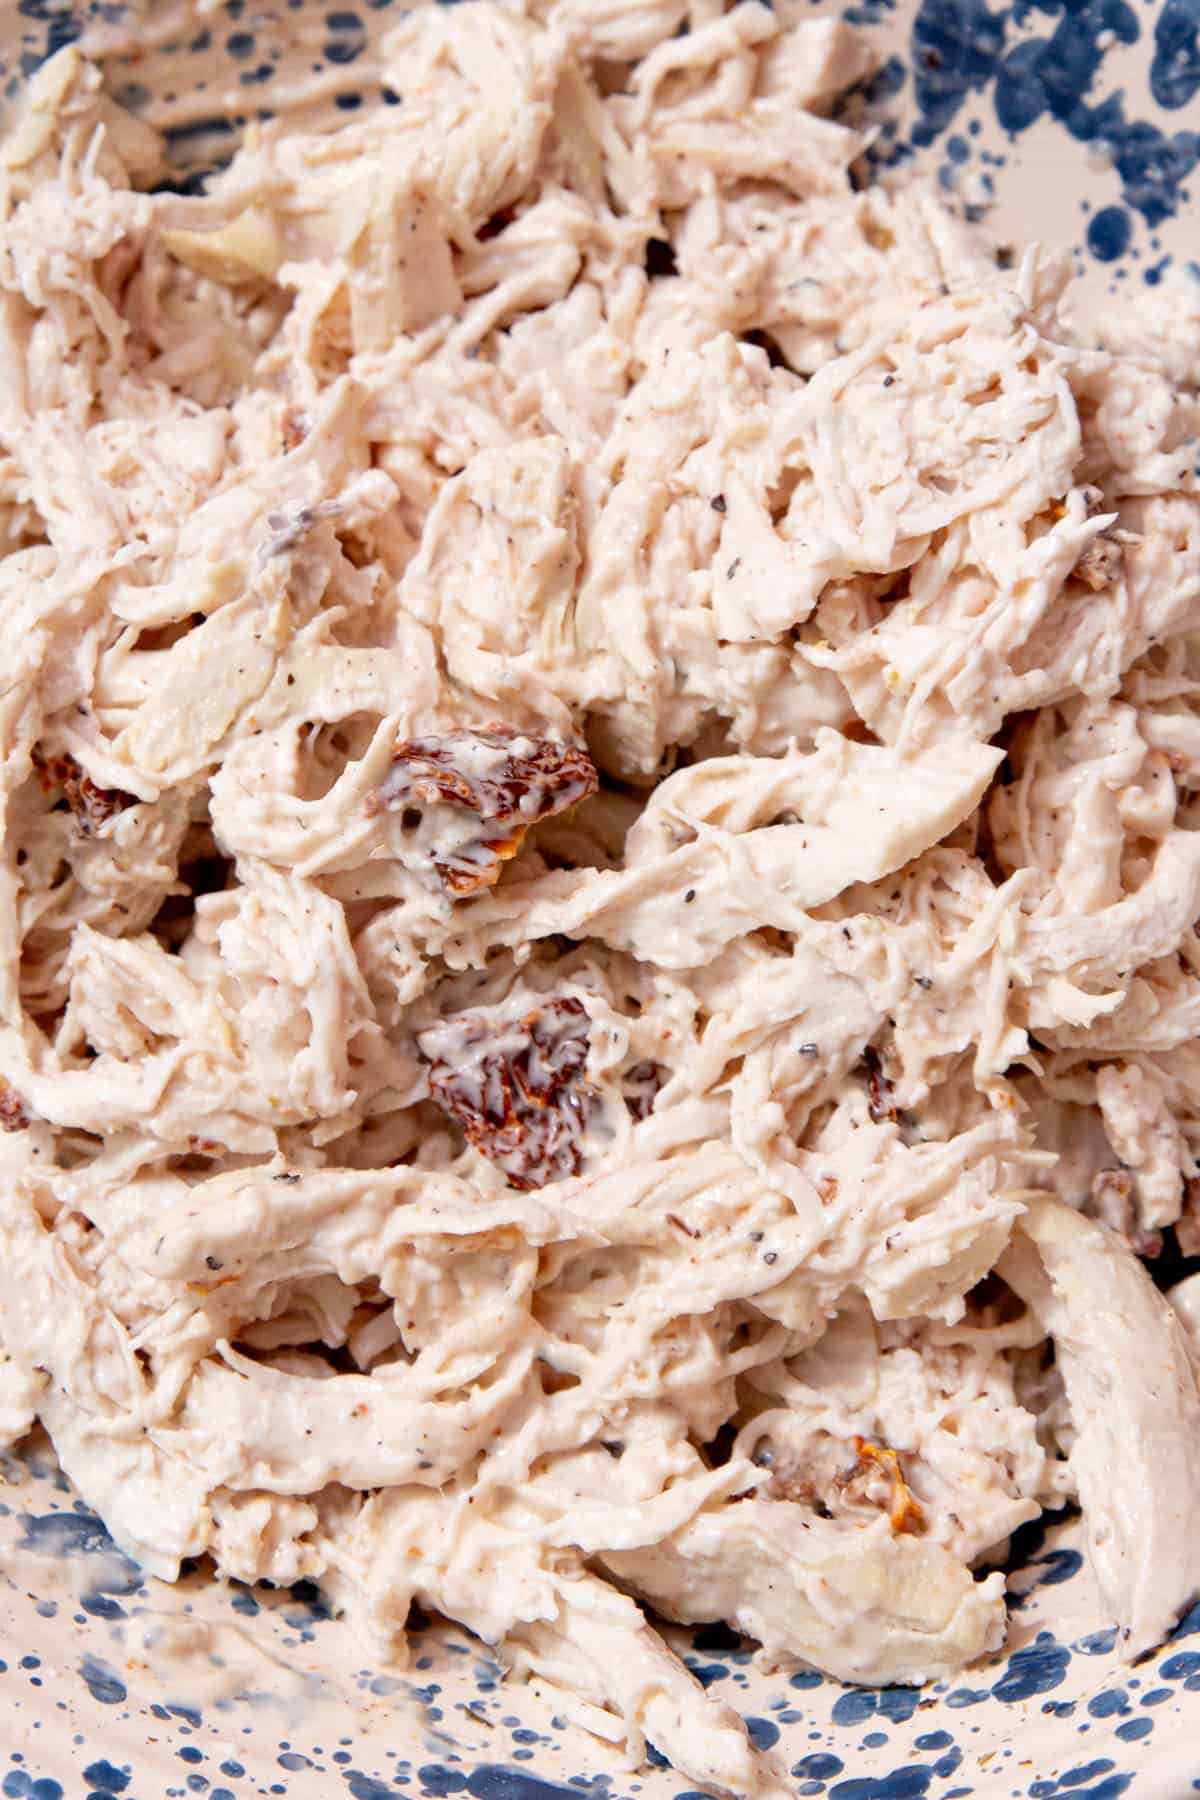 Shredded chicken with some dressing mixed in.


